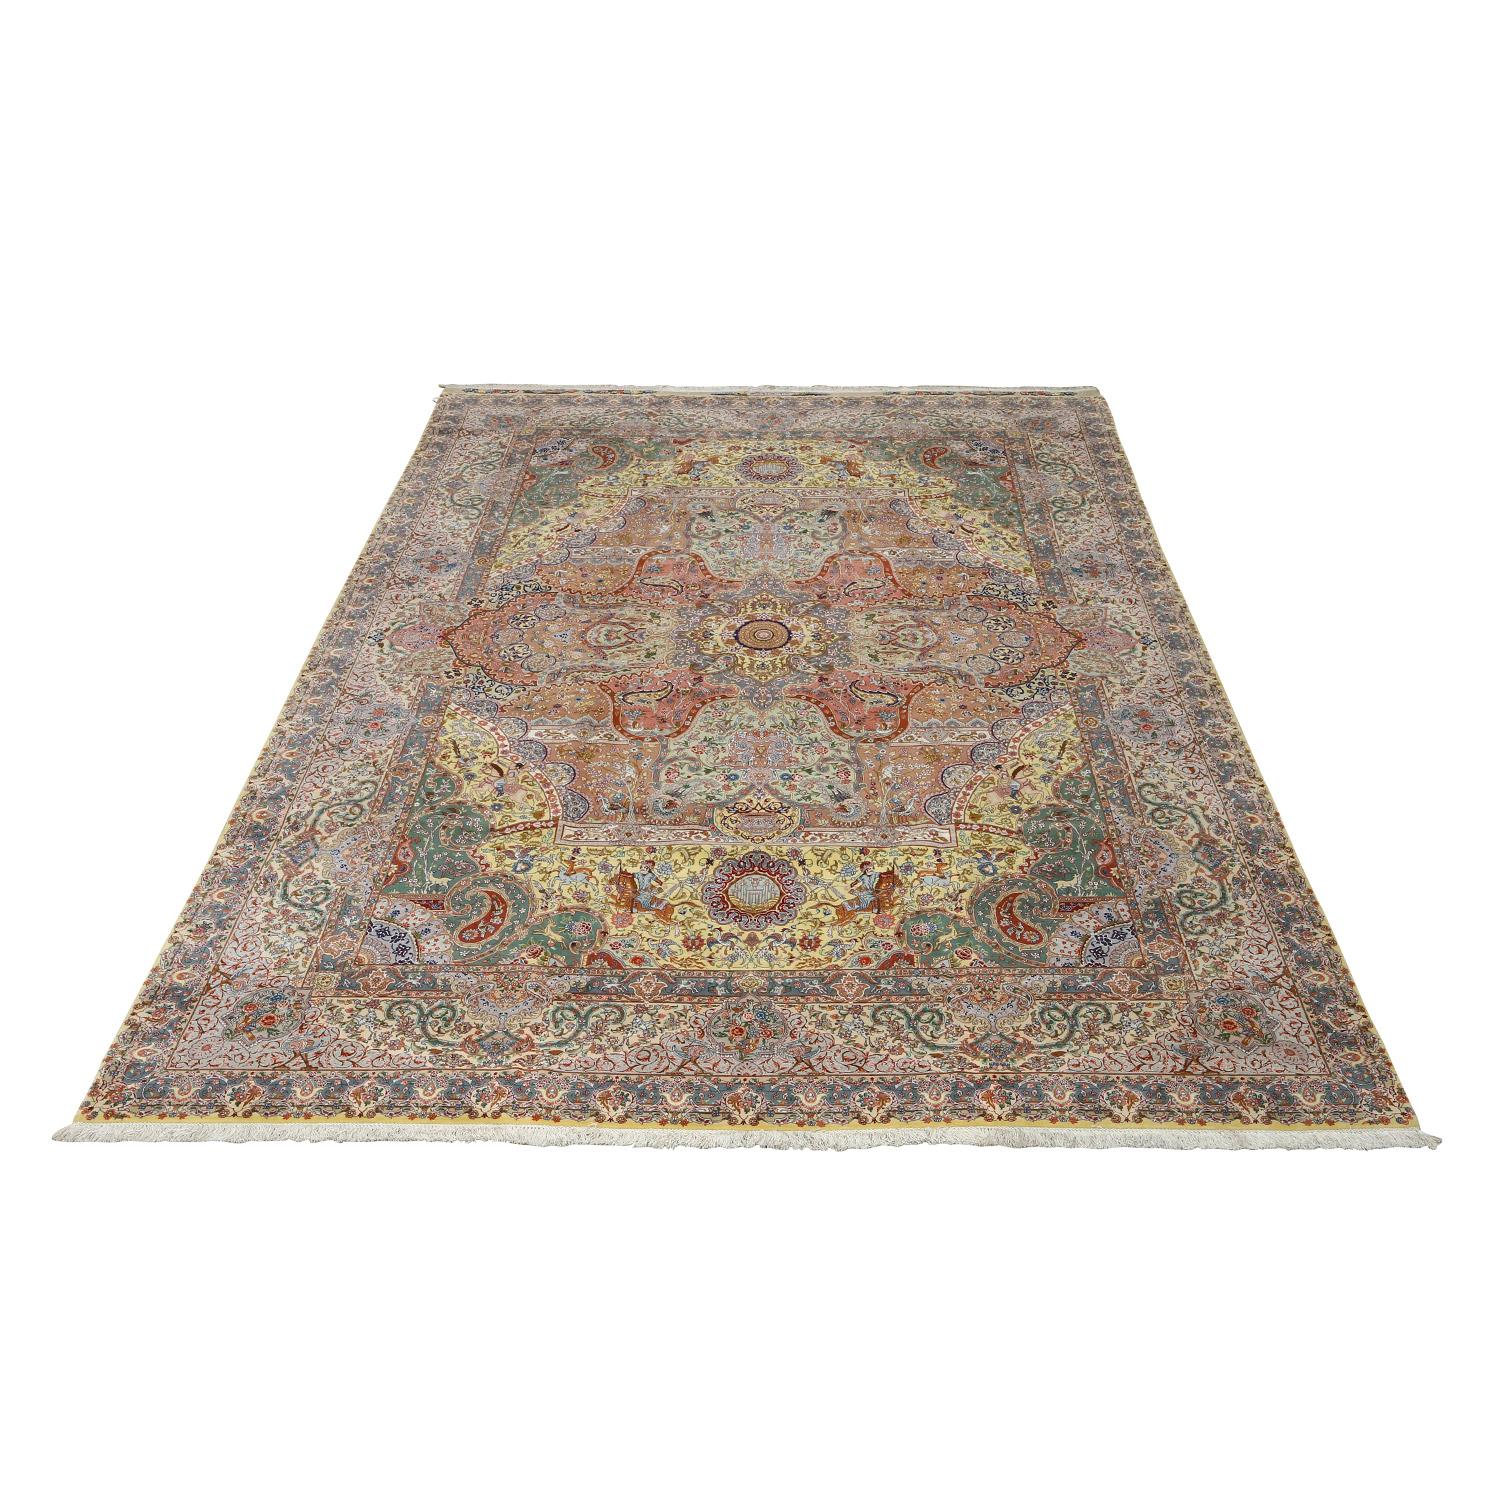 This vintage Tabriz rug, skillfully woven by Nezam, represents a captivating blend of artistry and tradition. Renowned for their exceptional craftsmanship, Tabriz rugs are cherished for their intricate designs and timeless elegance.

Featuring a